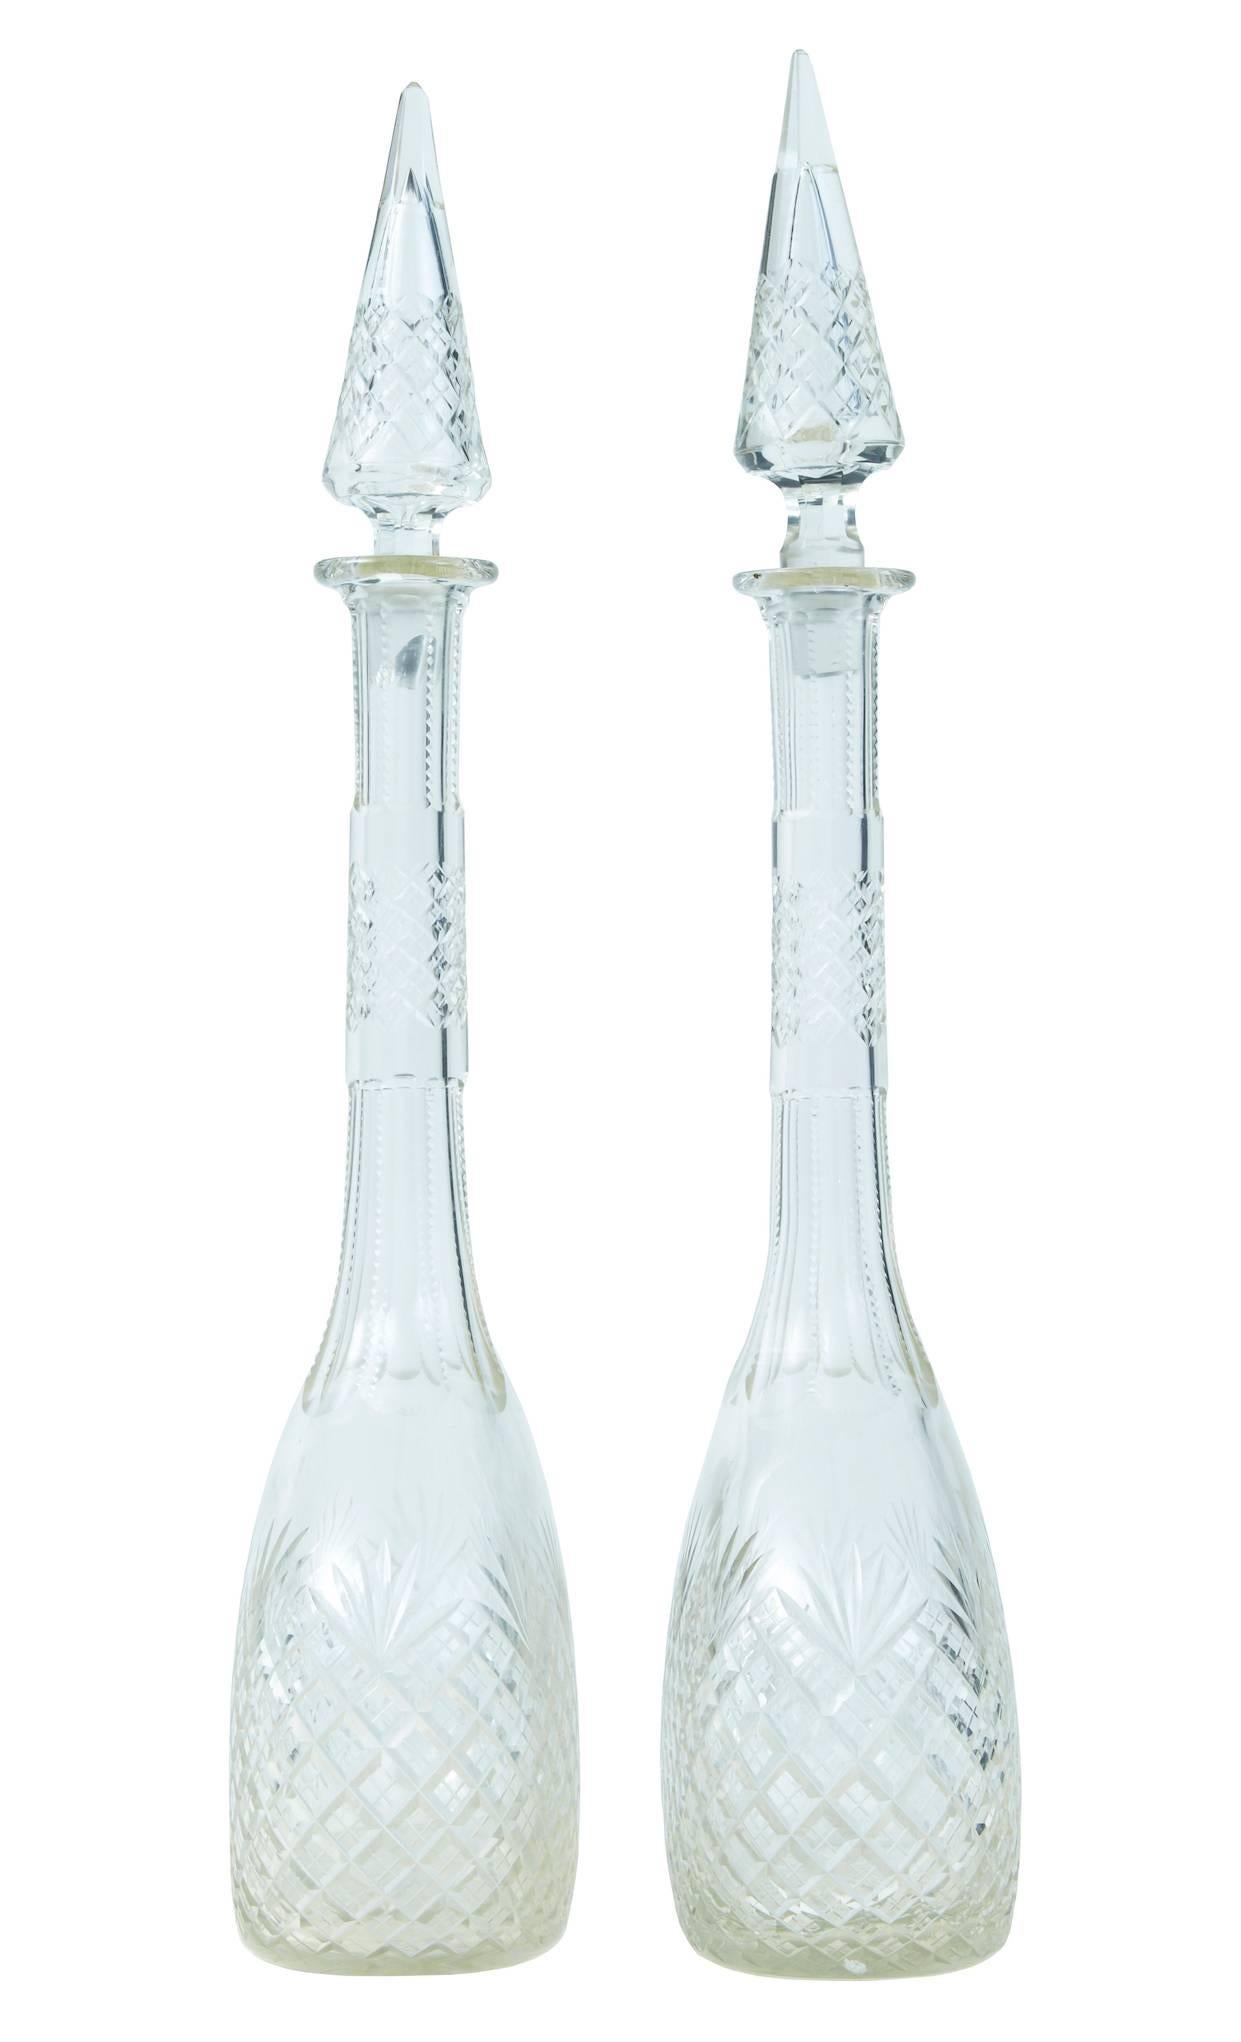 Fine pair of 1920's decanters with original stoppers.
1 chipped stopper at the base.

Height: 18